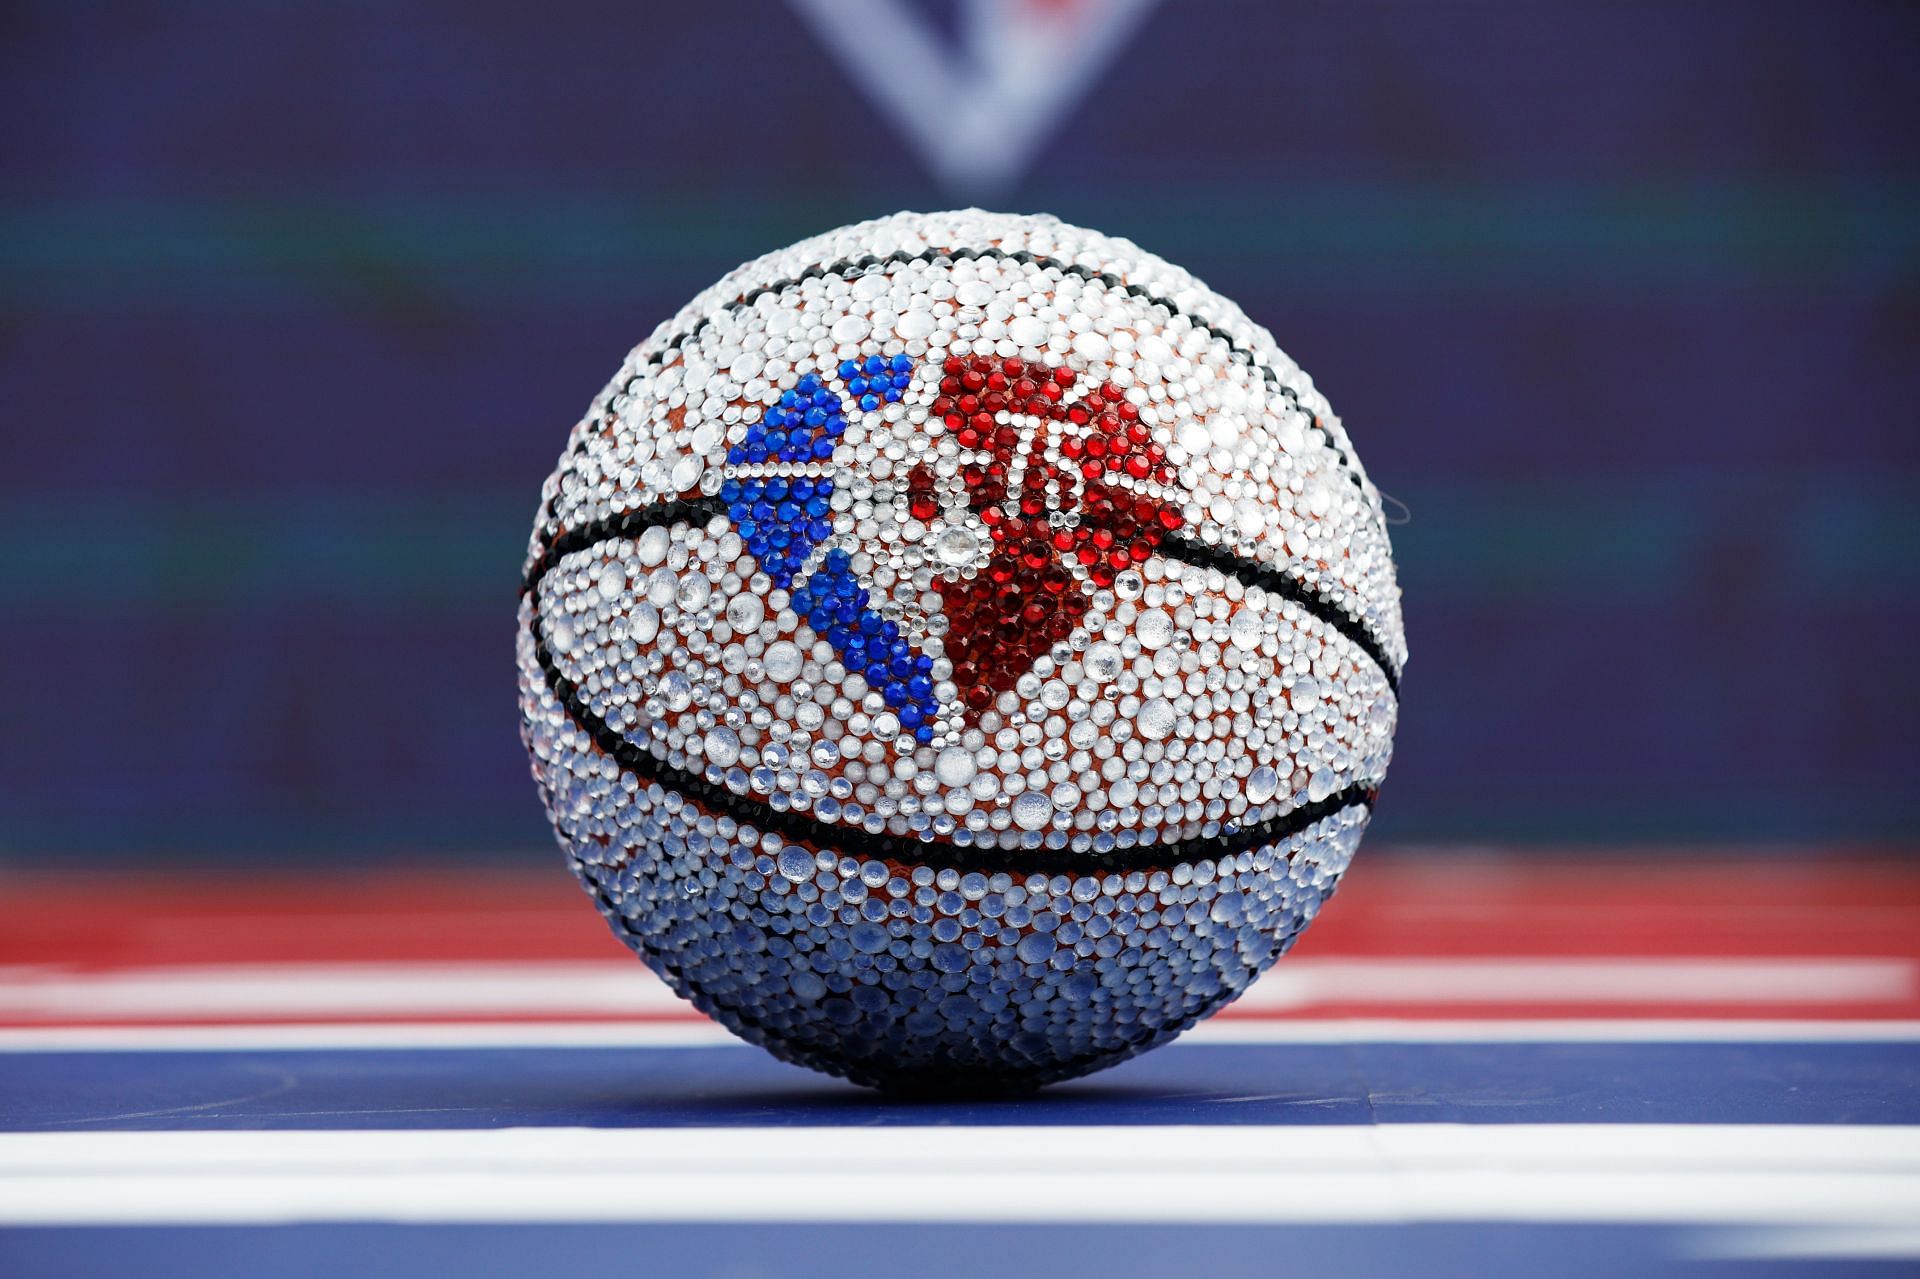 A jewel encrusted basketball with NBA 75th anniversary detail.